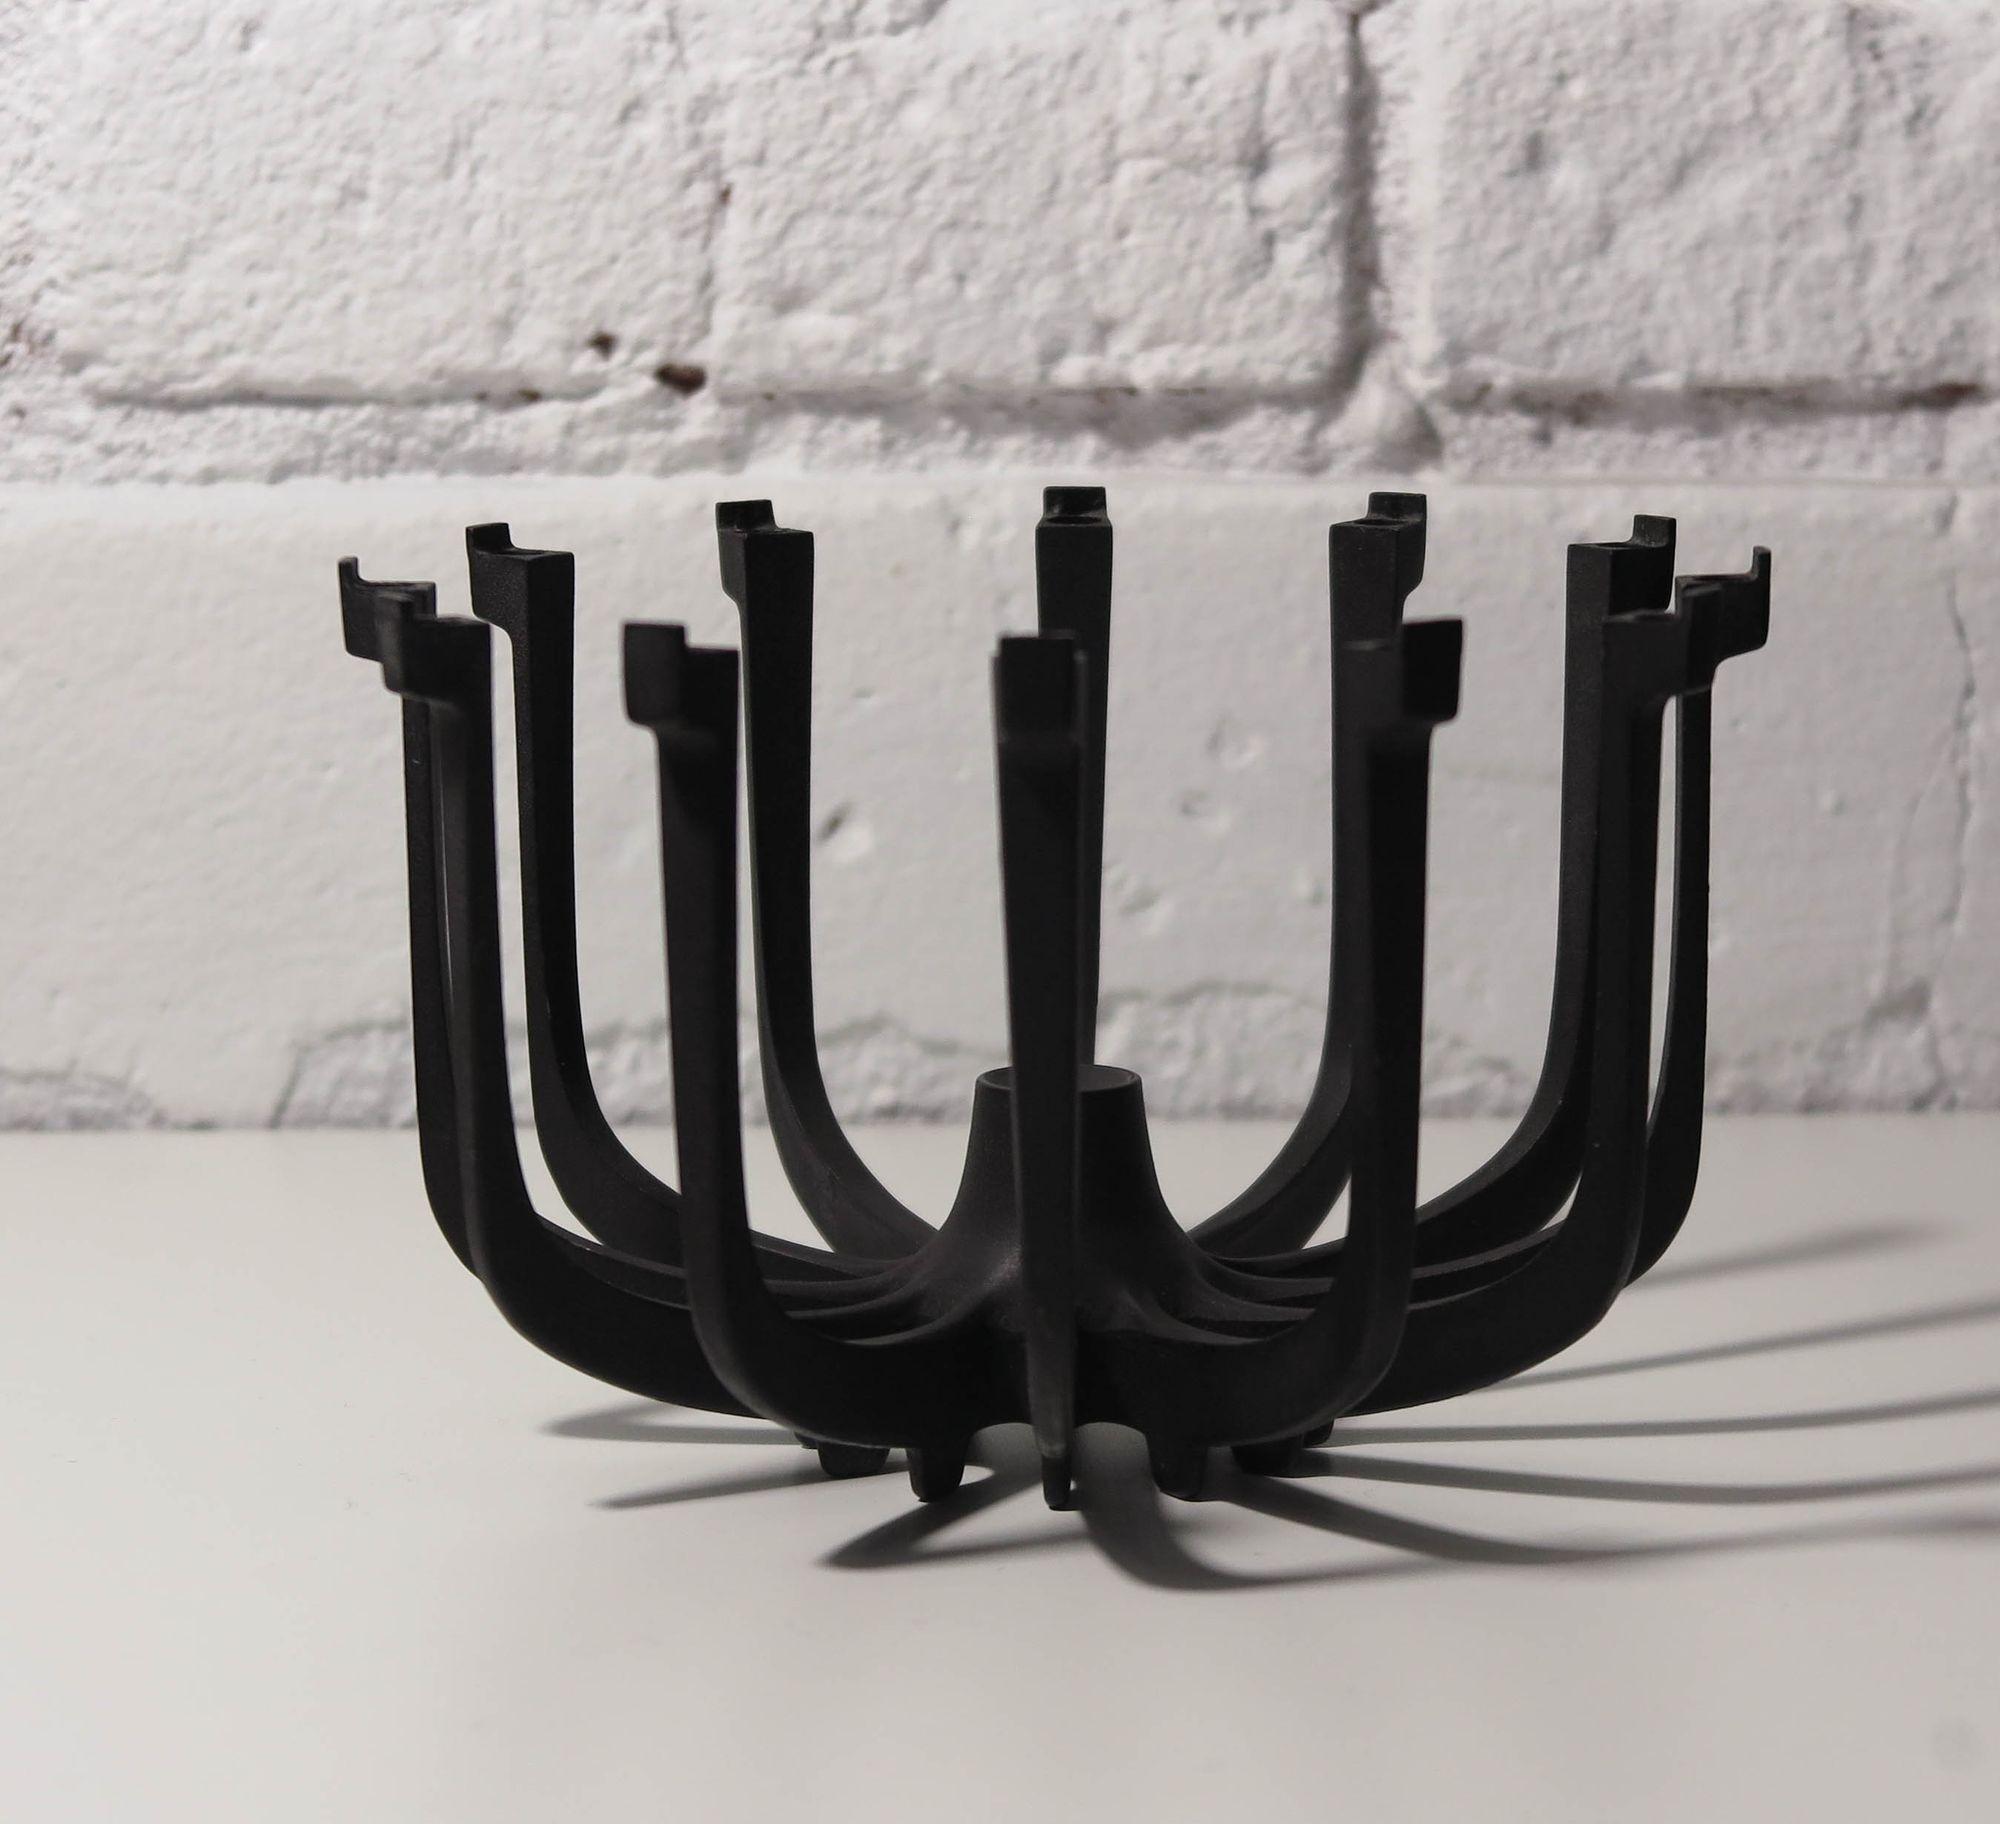 Danish cast iron candleholder designed by Gunnar Cyren, circa 1960 Denmark. Candle Holder features eight candles sticks. Excellent condition with minor signs of age and use.
Measurements
height 4.50''
diameter 7.25''.